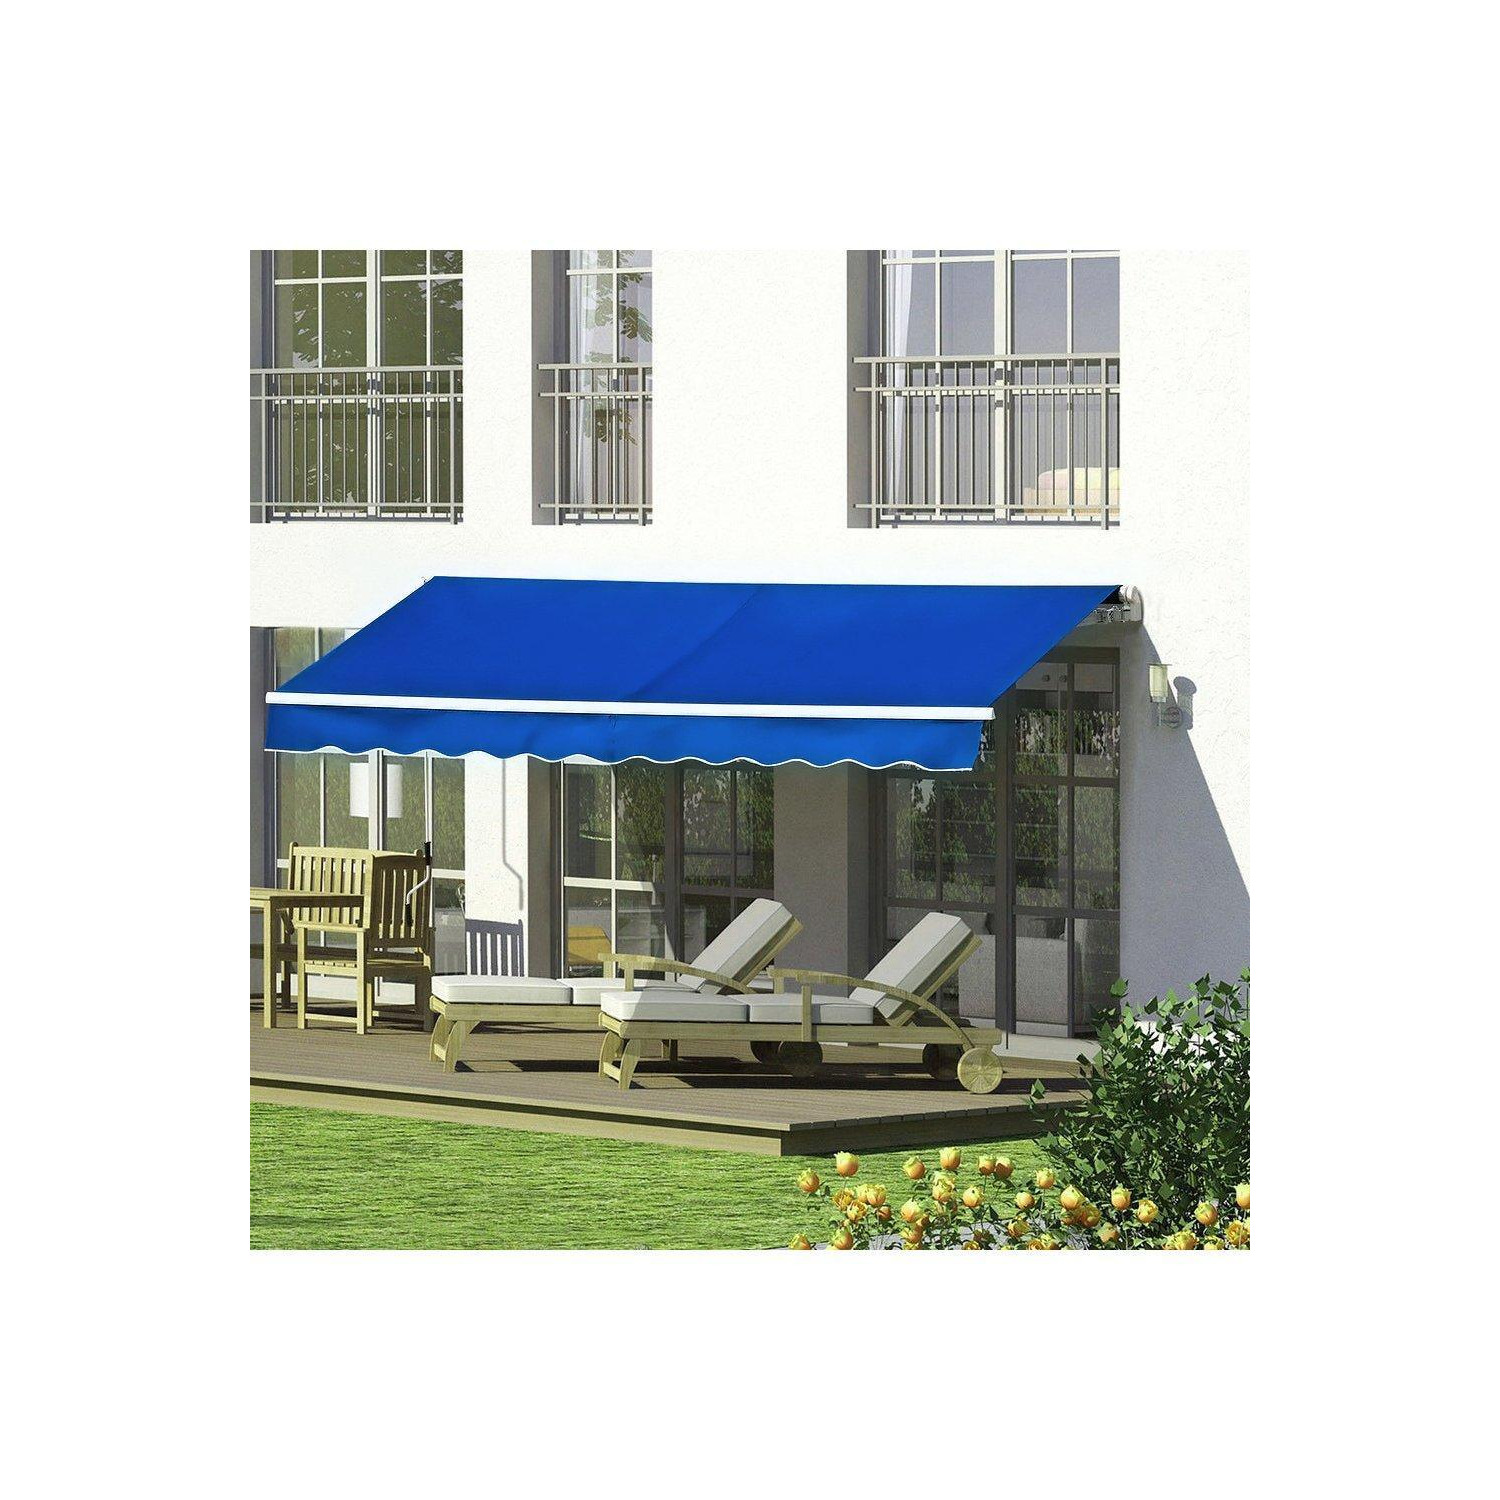 4m W x 3m D Retractable Patio Awning - image 1